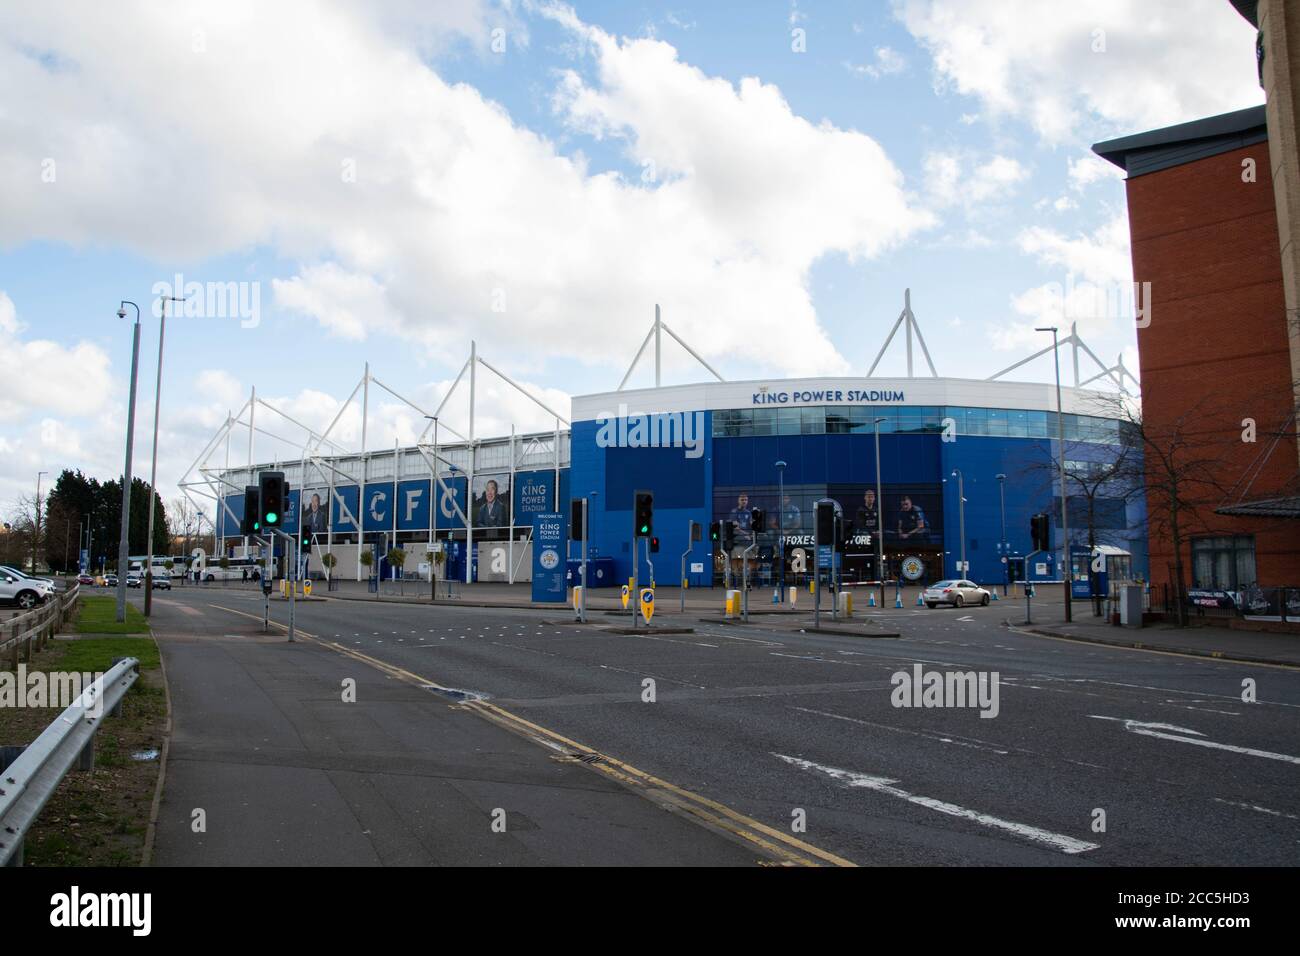 Entrance to King Power Stadium the home of Leicester City football club, empty due to league cancellations Stock Photo